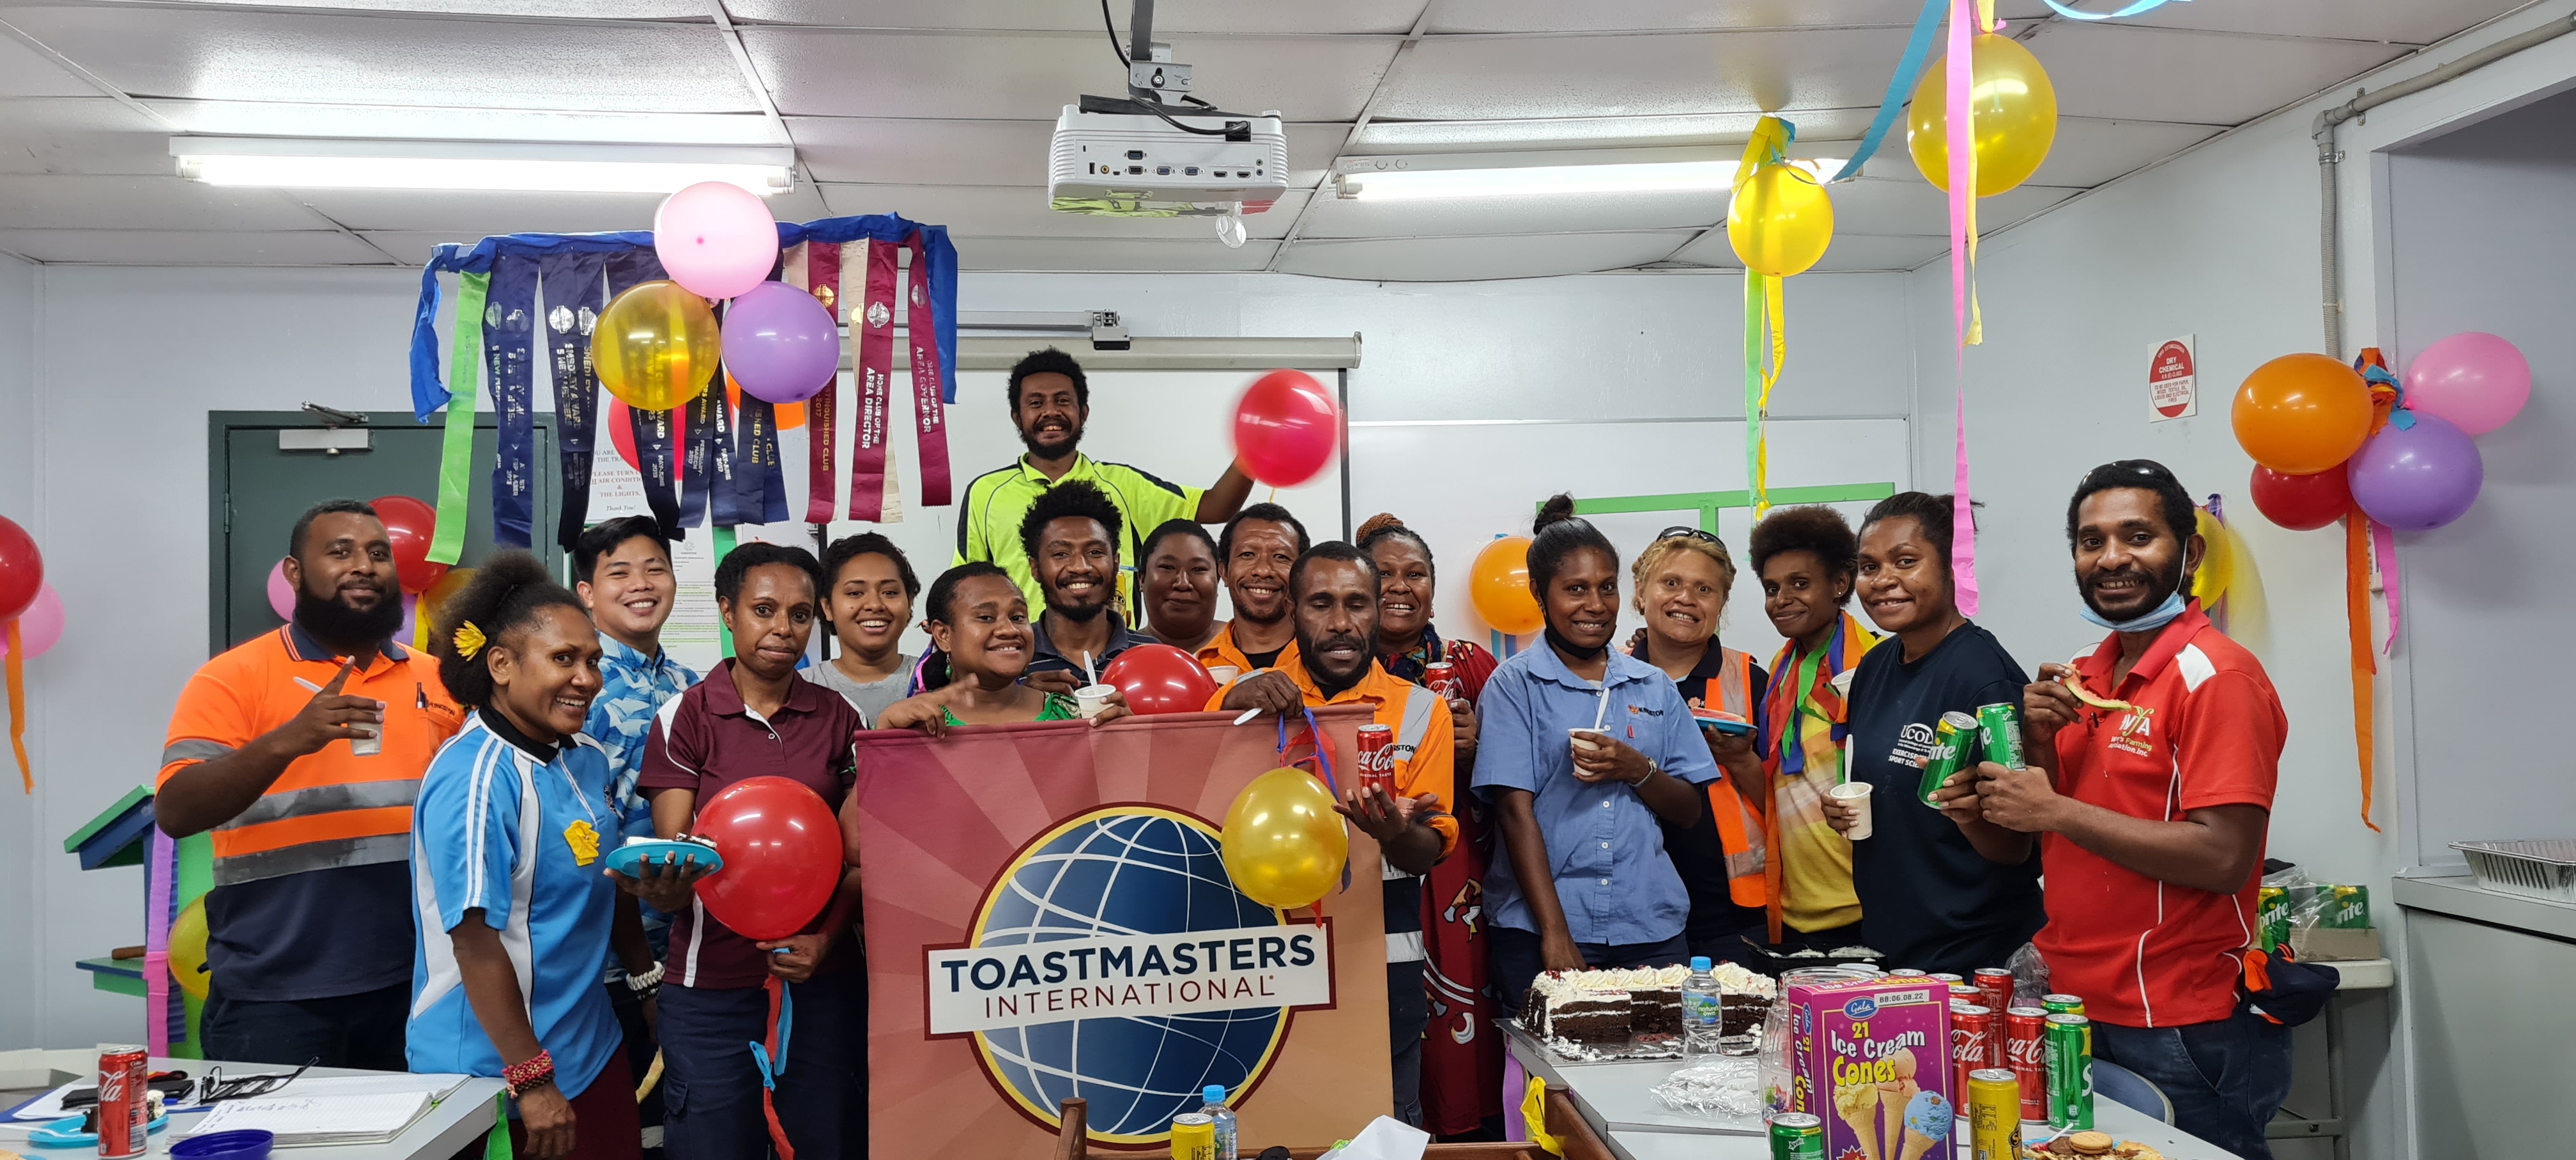 Show us how you celebrated Kingstons Corporate Toastmasters Club